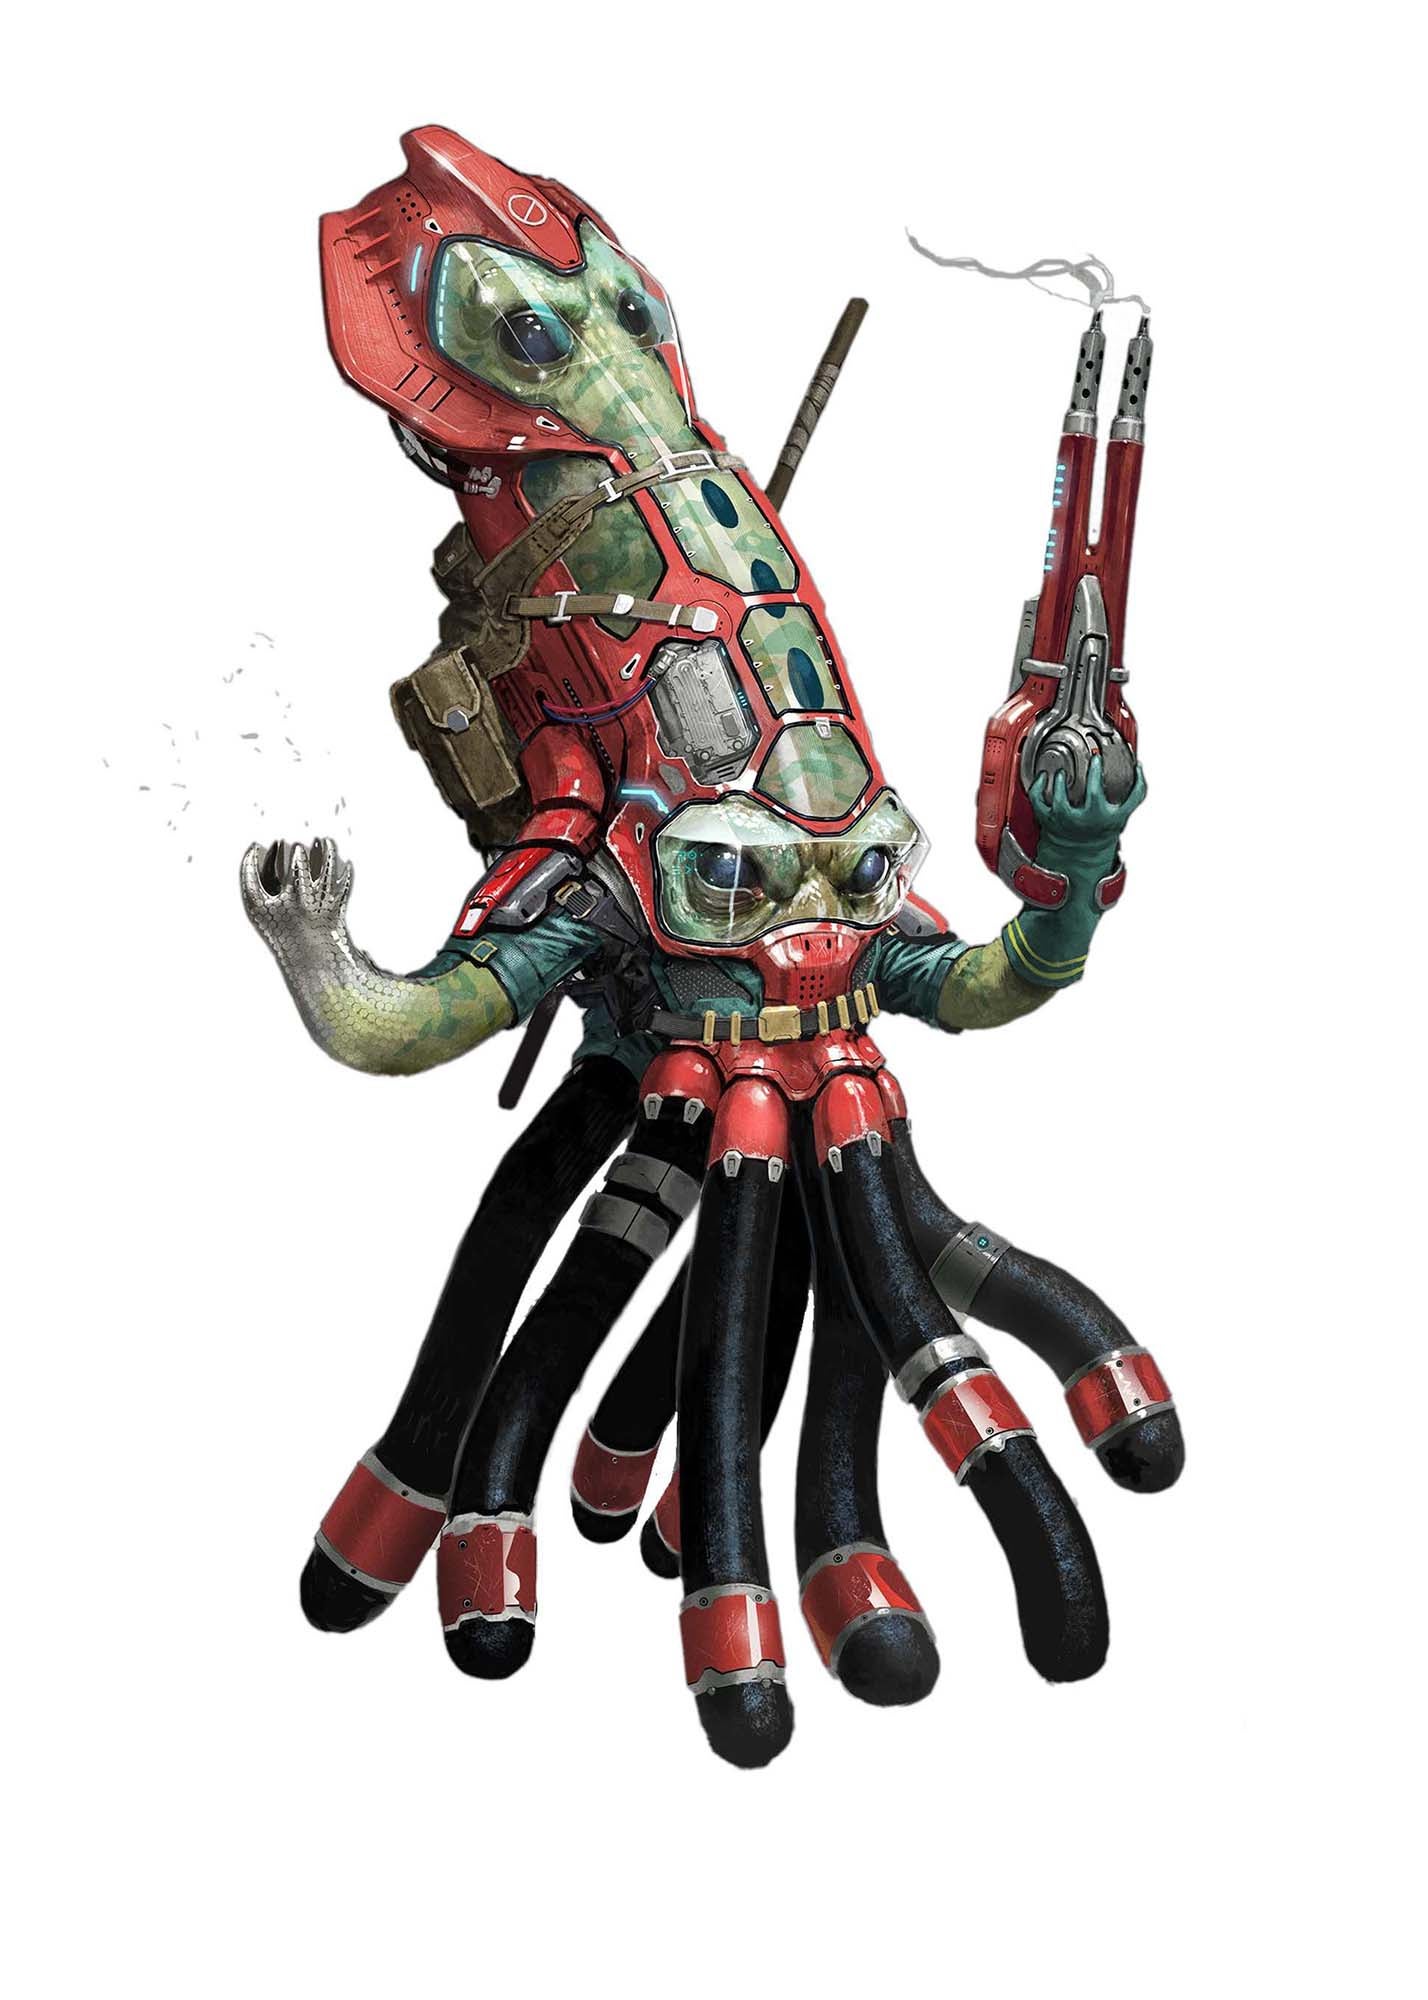 A giant squid creature with two pairs of eyes in its elongated head is dressed in an environmental space suit. A small cloud of microscopic nanites form into a weapon in its hand